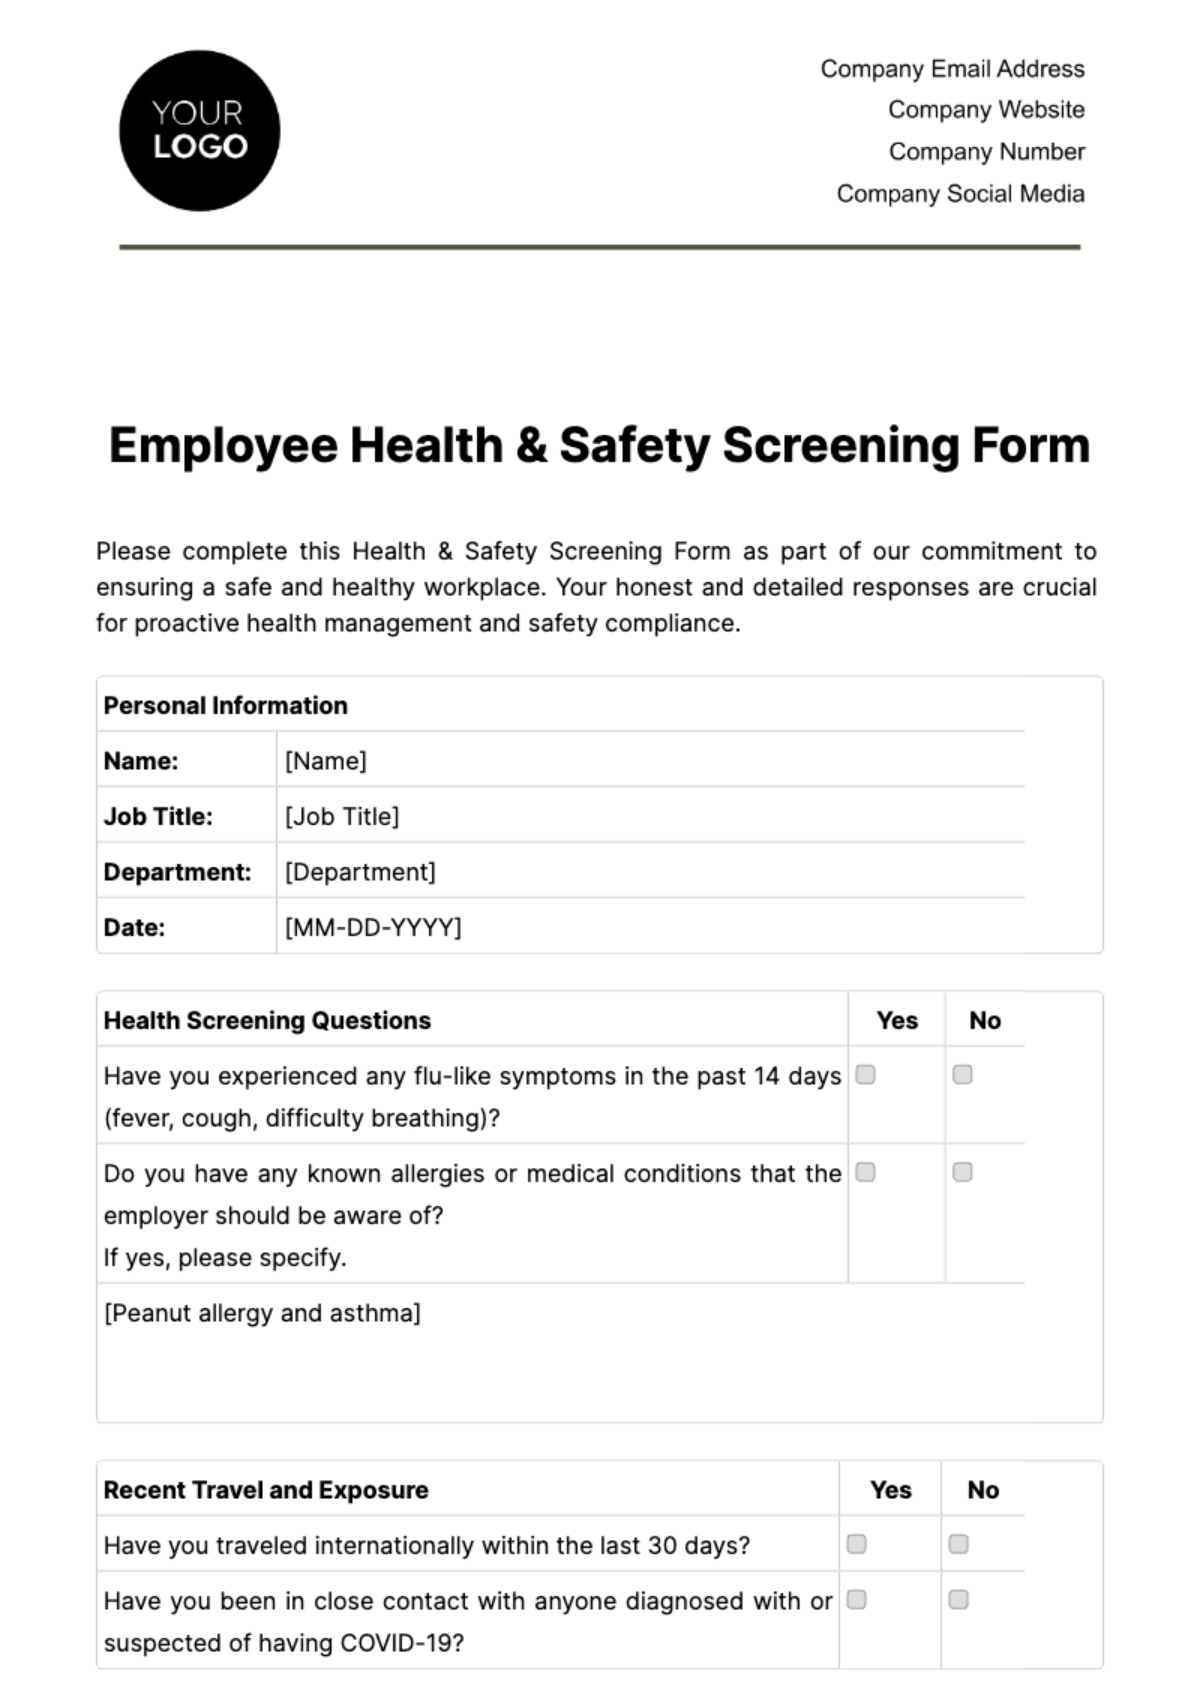 Employee Health & Safety Screening Form Template